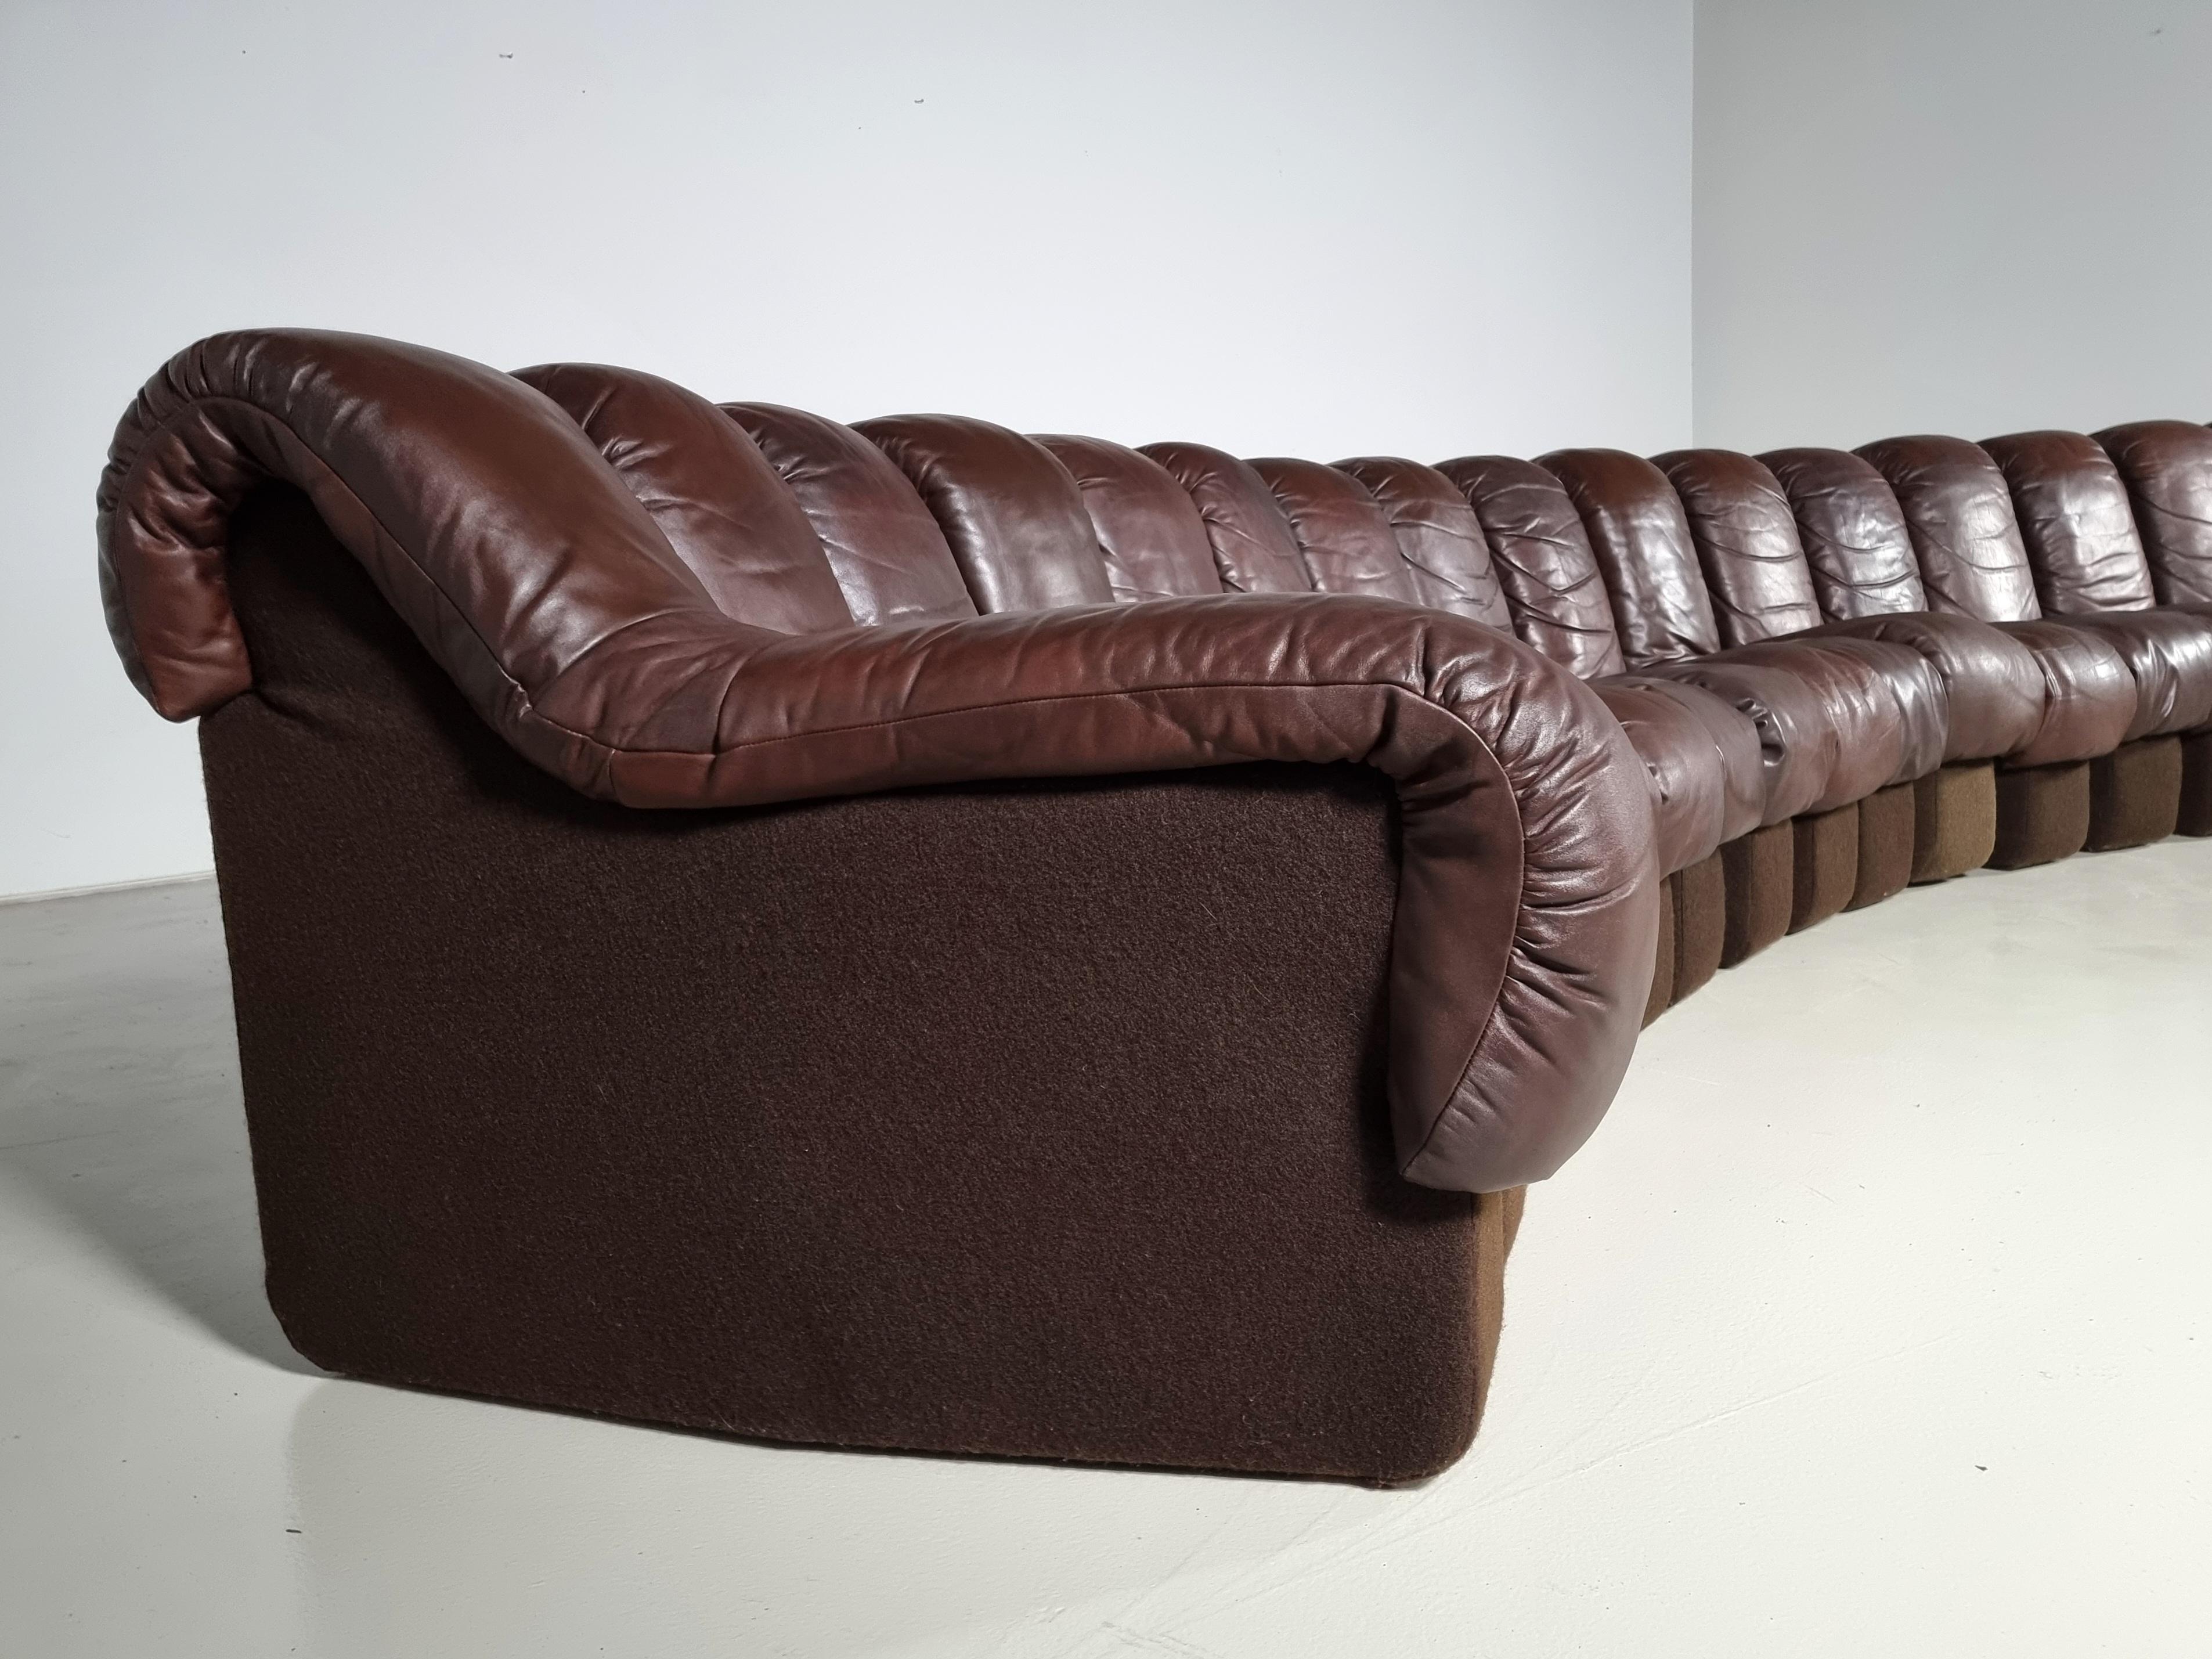 Late 20th Century Ds-600 'Snake' Sofa in Original Leather by De Sede Switzerland, 1970s